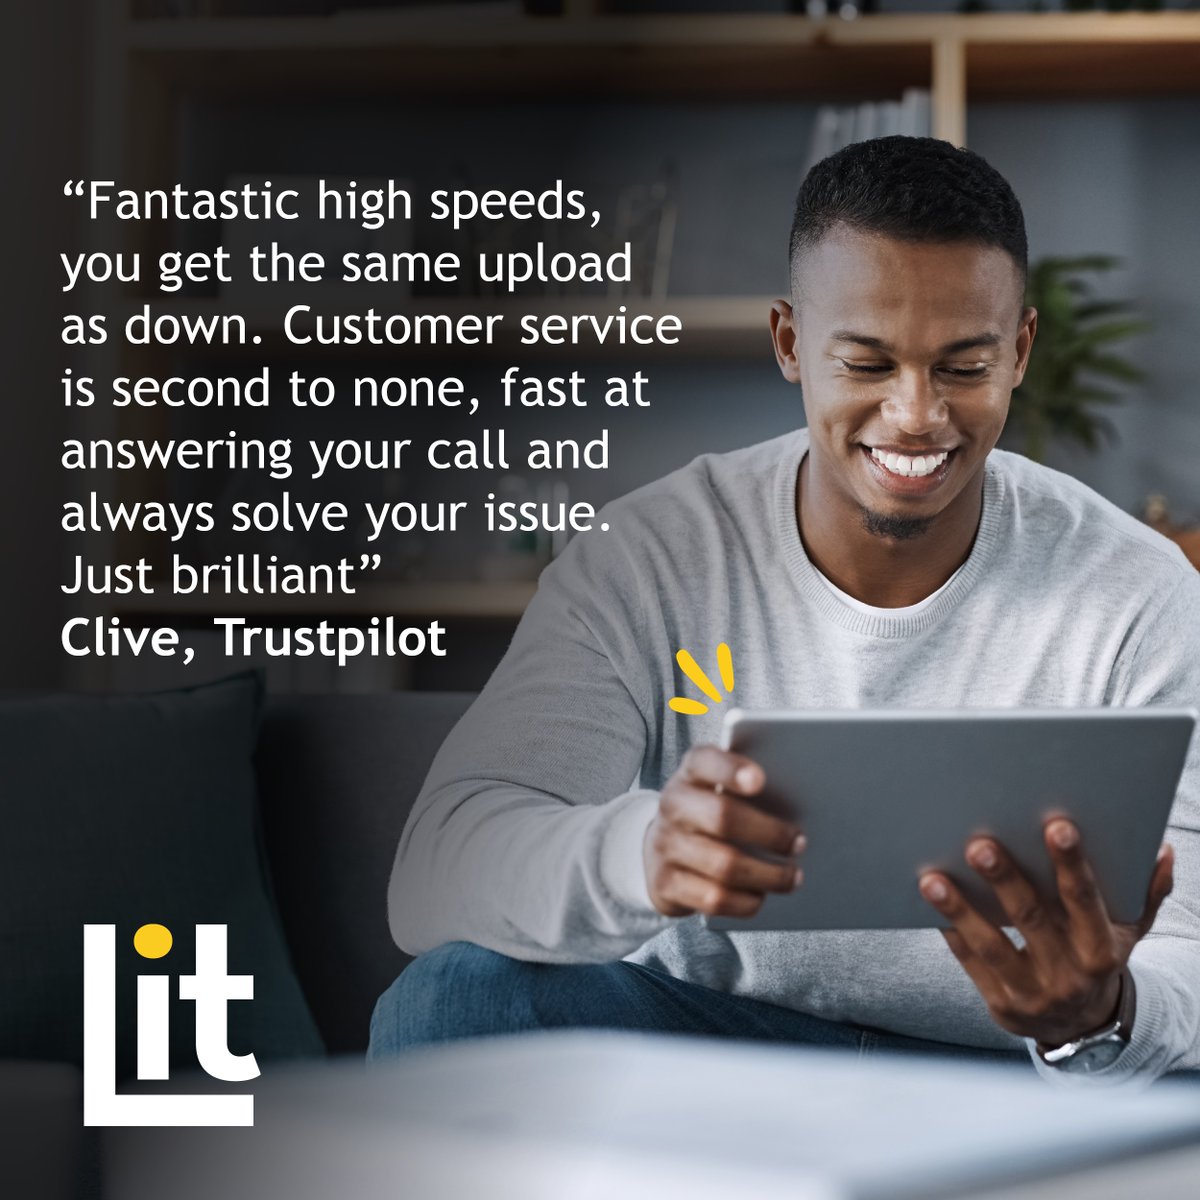 Symmetrical speeds all the way – the way internet should be 🤩 'Fantastic high speeds, you get the same upload as down. Customer service is second to none, fast at answering your call and always solve your issue. Just brilliant' Clive, Trustpilot